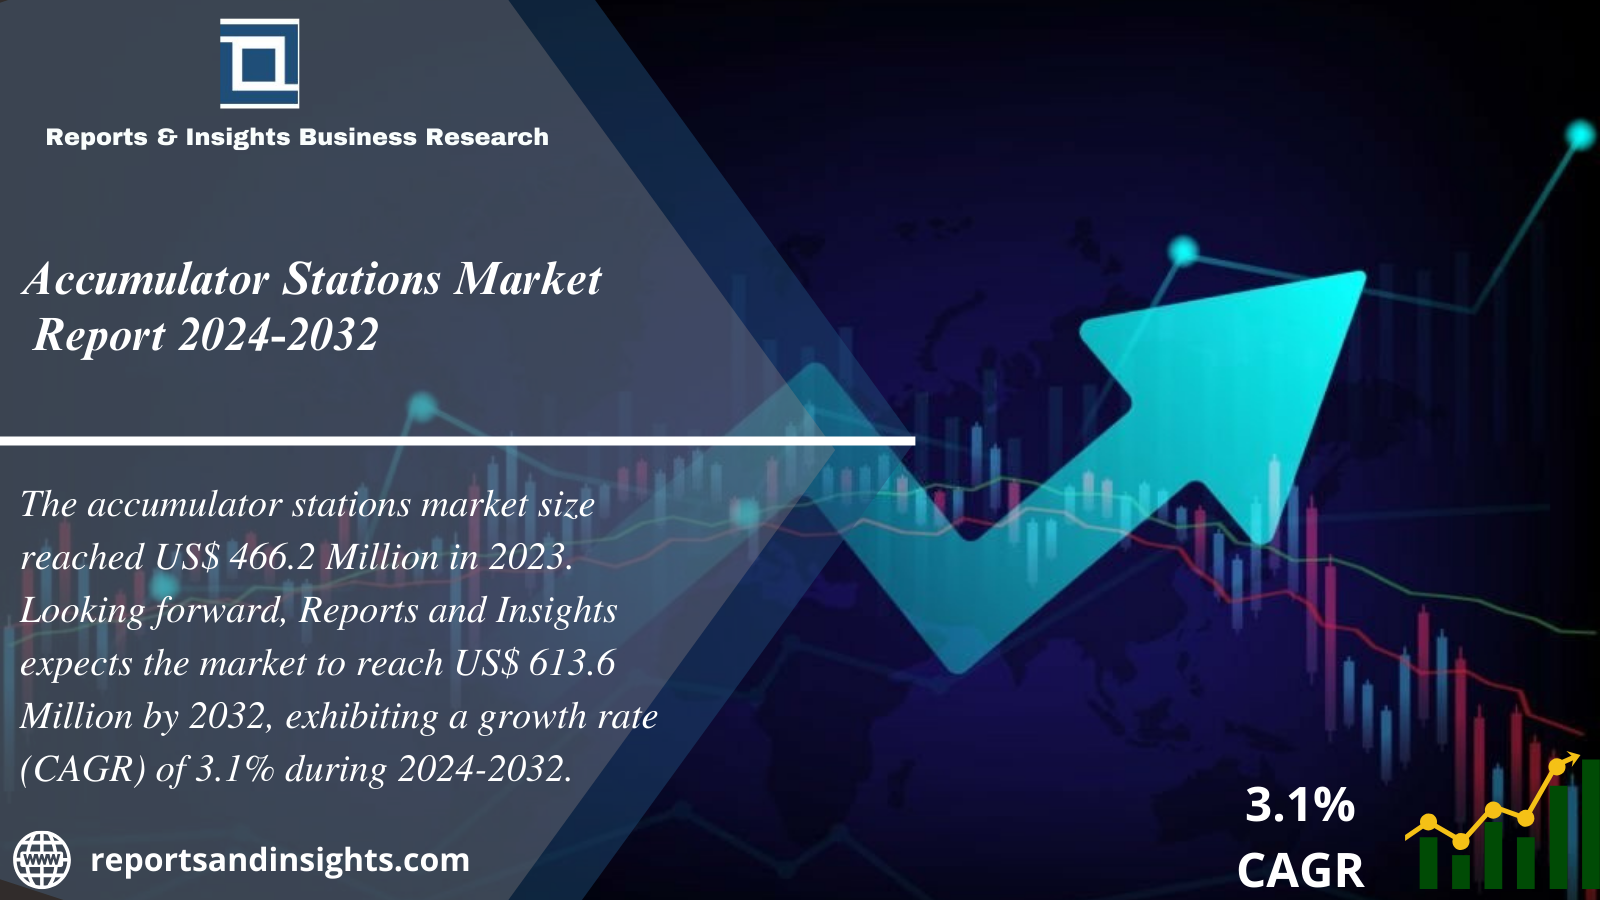 Accumulator Stations Market Research Report 2024 to 2032: Trends, Growth, Size, Share and Key Players